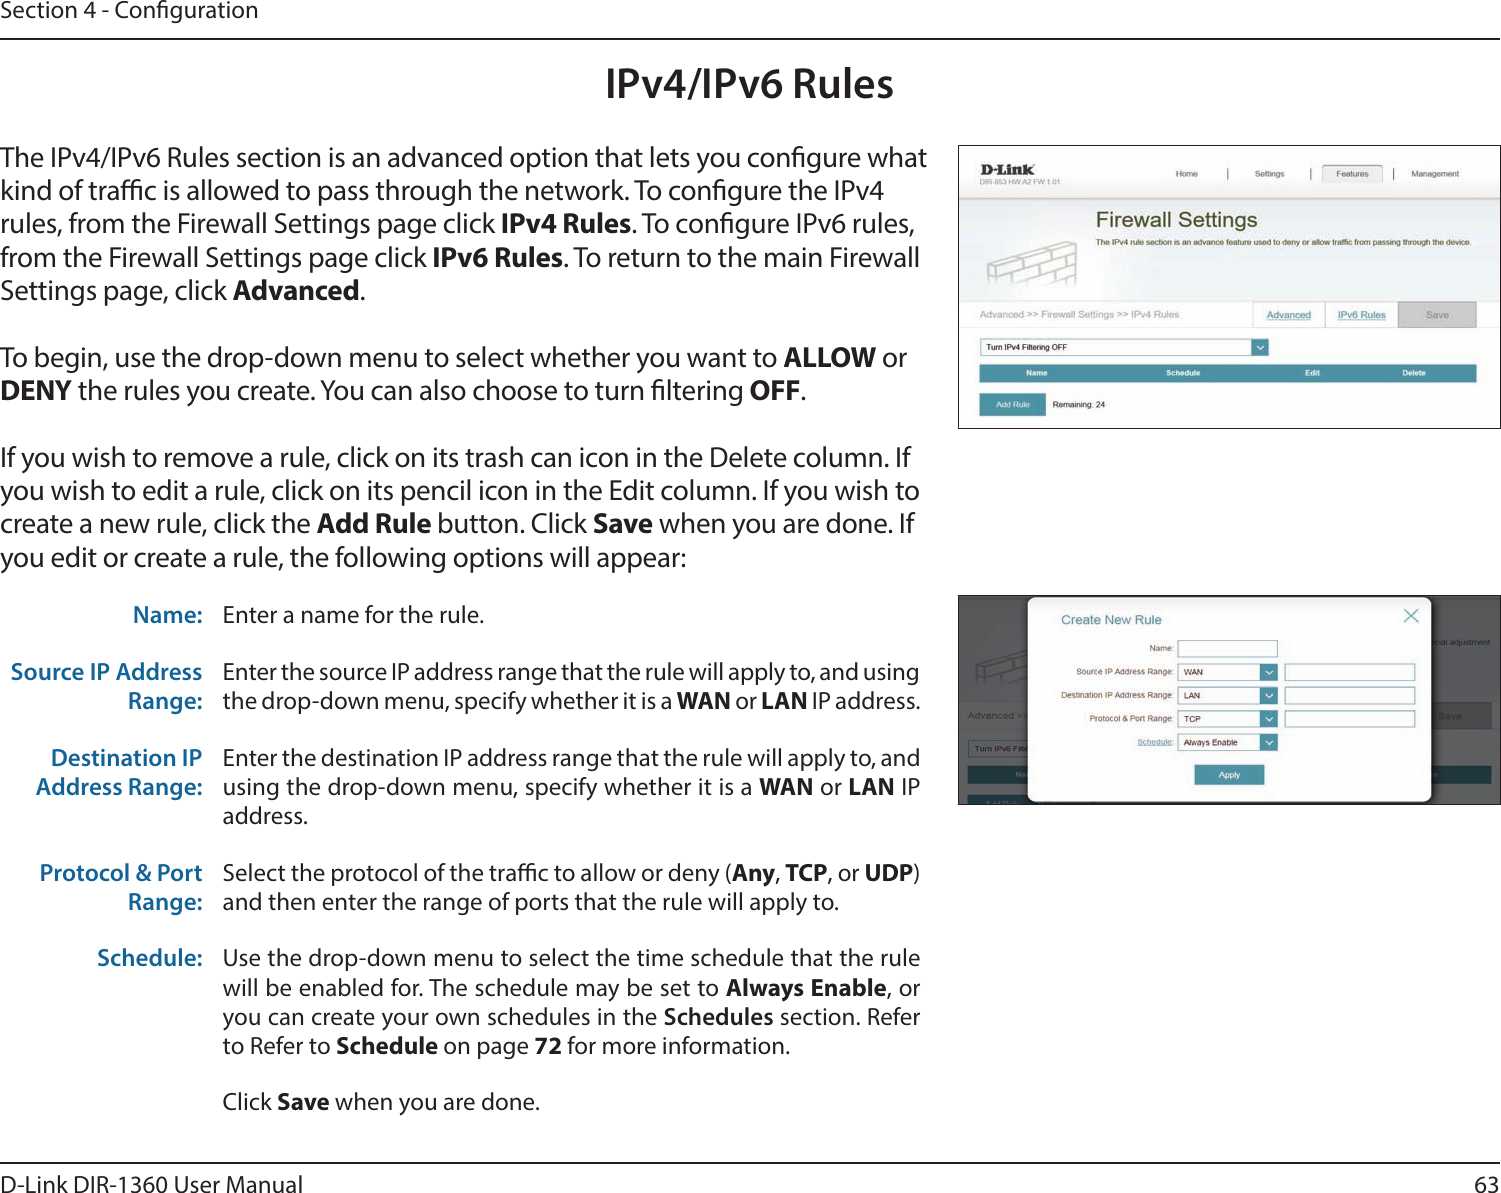 63D-Link DIR-1360 User ManualSection 4 - CongurationIPv4/IPv6 RulesThe IPv4/IPv6 Rules section is an advanced option that lets you congure what kind of trac is allowed to pass through the network. To congure the IPv4 rules, from the Firewall Settings page click IPv4 Rules. To congure IPv6 rules, from the Firewall Settings page click IPv6 Rules. To return to the main Firewall Settings page, click Advanced.To begin, use the drop-down menu to select whether you want to ALLOW or DENY the rules you create. You can also choose to turn ltering OFF.If you wish to remove a rule, click on its trash can icon in the Delete column. If you wish to edit a rule, click on its pencil icon in the Edit column. If you wish to create a new rule, click the Add Rule button. Click Save when you are done. If you edit or create a rule, the following options will appear:Name: Enter a name for the rule.Source IP Address Range:Enter the source IP address range that the rule will apply to, and using the drop-down menu, specify whether it is a WAN or LAN IP address.Destination IP Address Range:Enter the destination IP address range that the rule will apply to, and using the drop-down menu, specify whether it is a WAN or LAN IP address.Protocol &amp; Port Range:Select the protocol of the trac to allow or deny (Any, TCP, or UDP) and then enter the range of ports that the rule will apply to.Schedule: Use the drop-down menu to select the time schedule that the rule will be enabled for. The schedule may be set to Always Enable, or you can create your own schedules in the Schedules section. Refer to Refer to Schedule on page 72 for more information.Click Save when you are done.